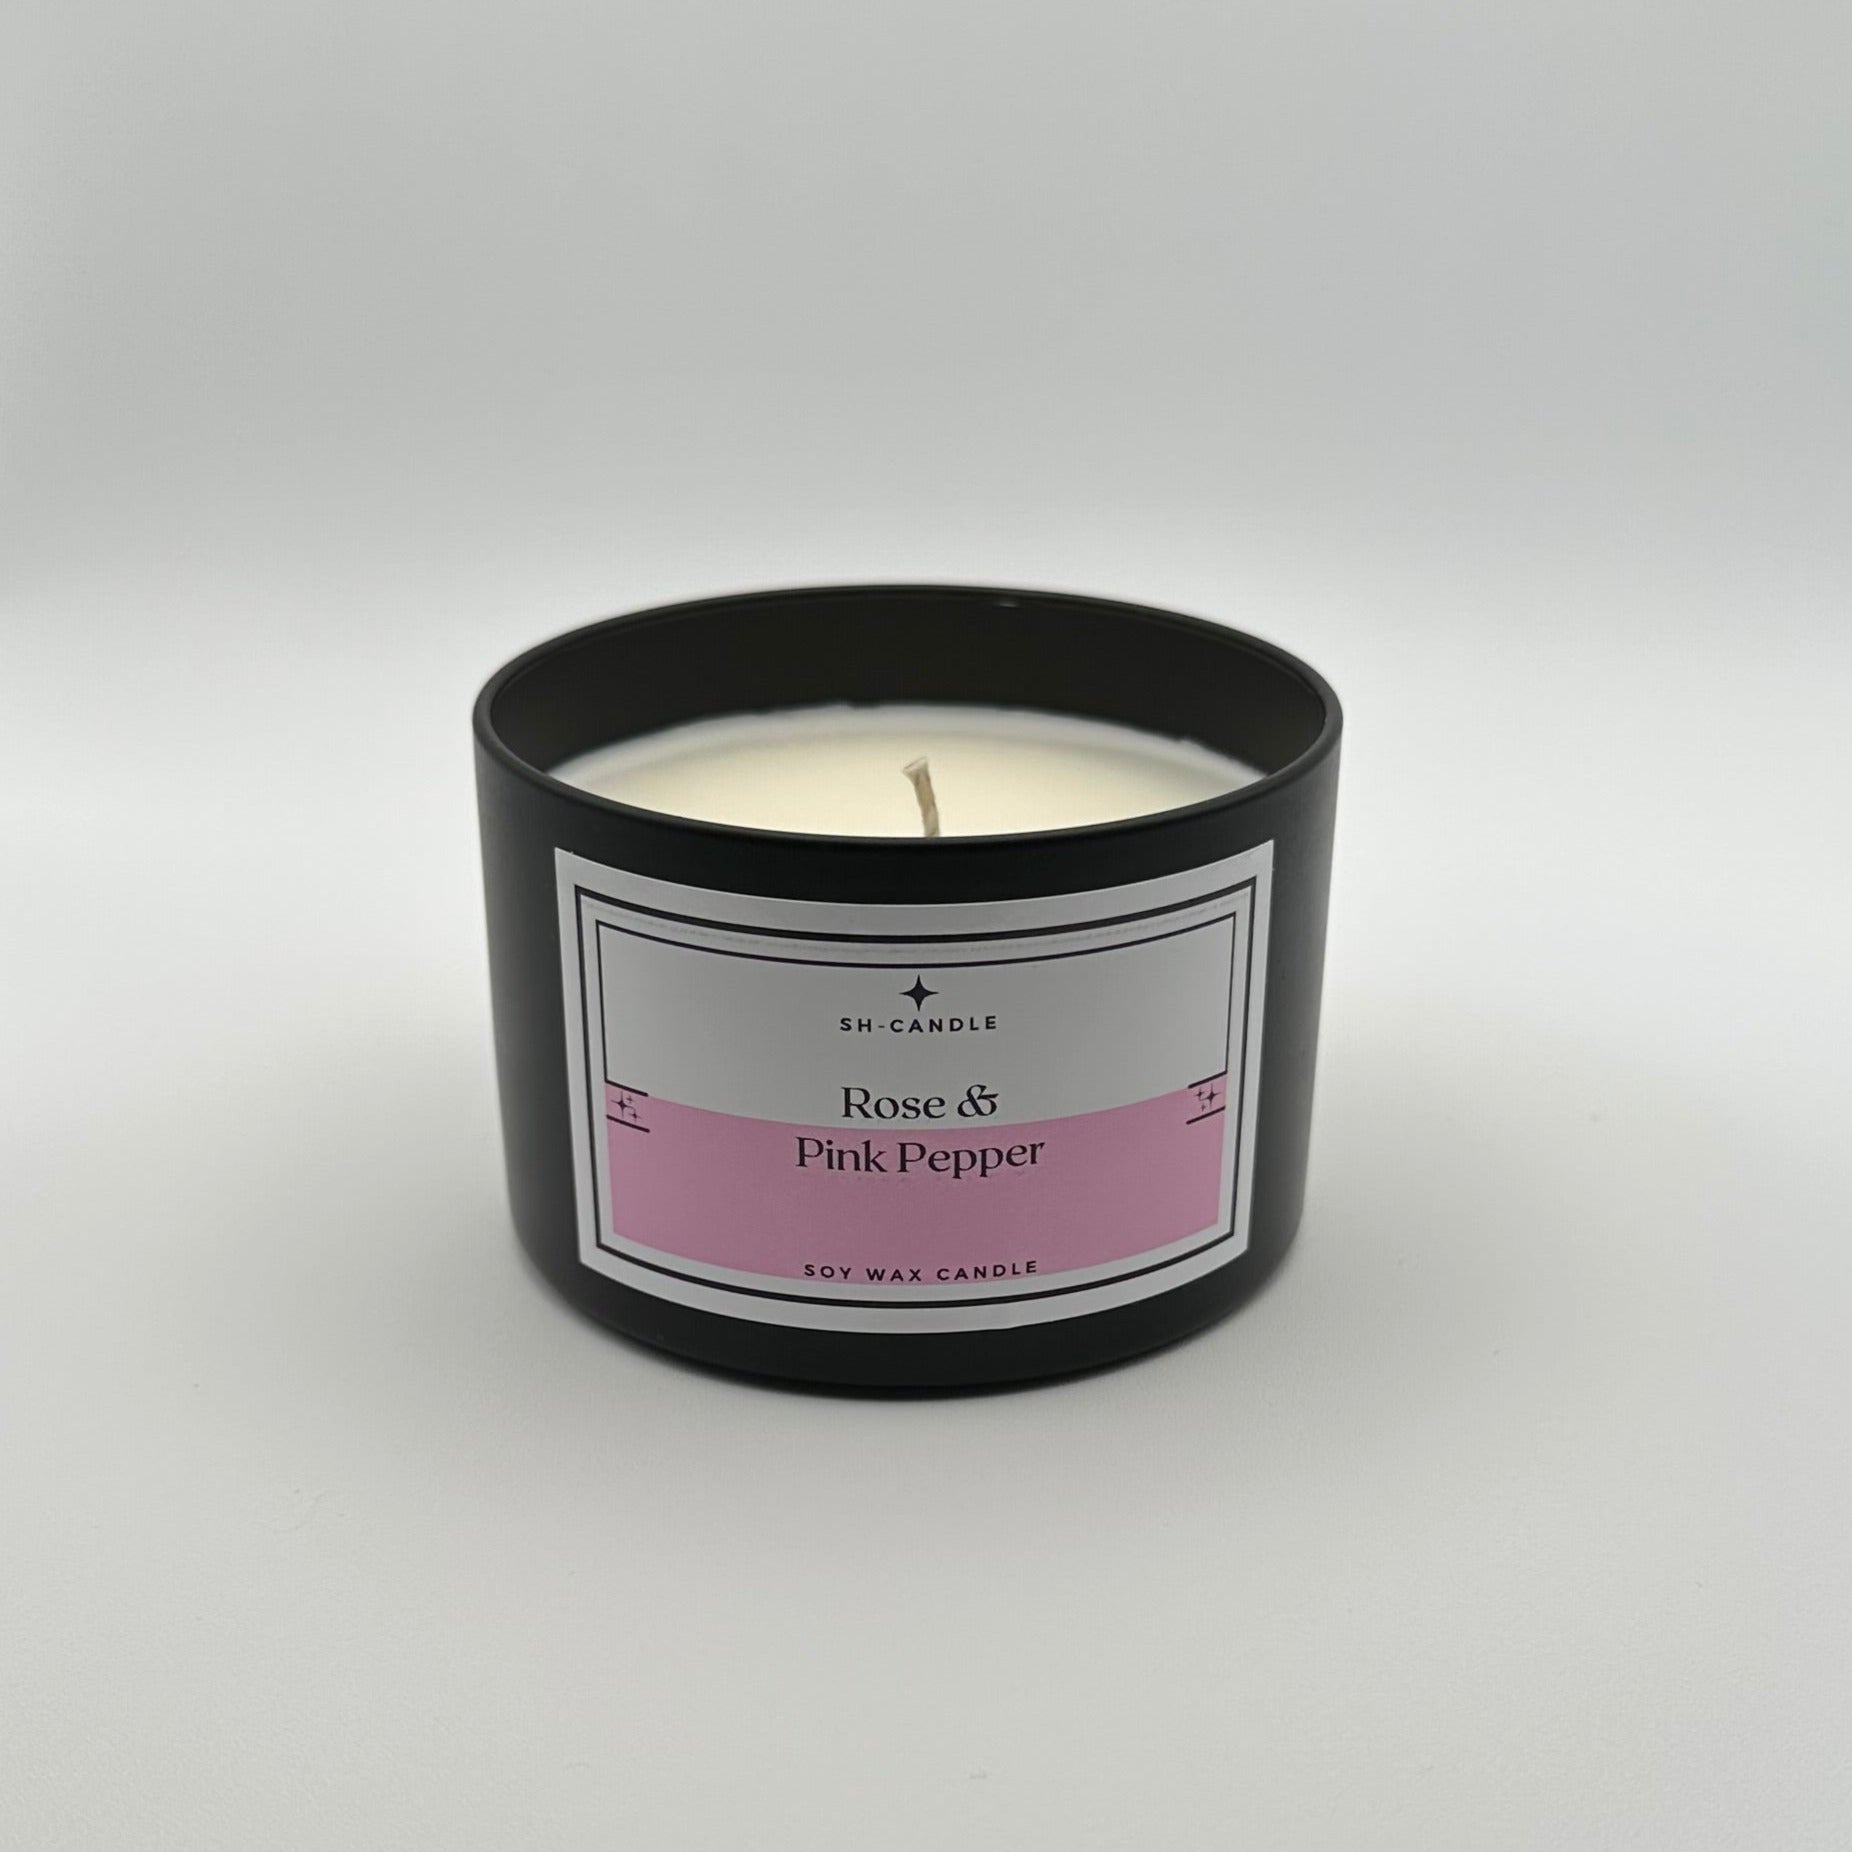 Rose & Pink Pepper - SH-CANDLE